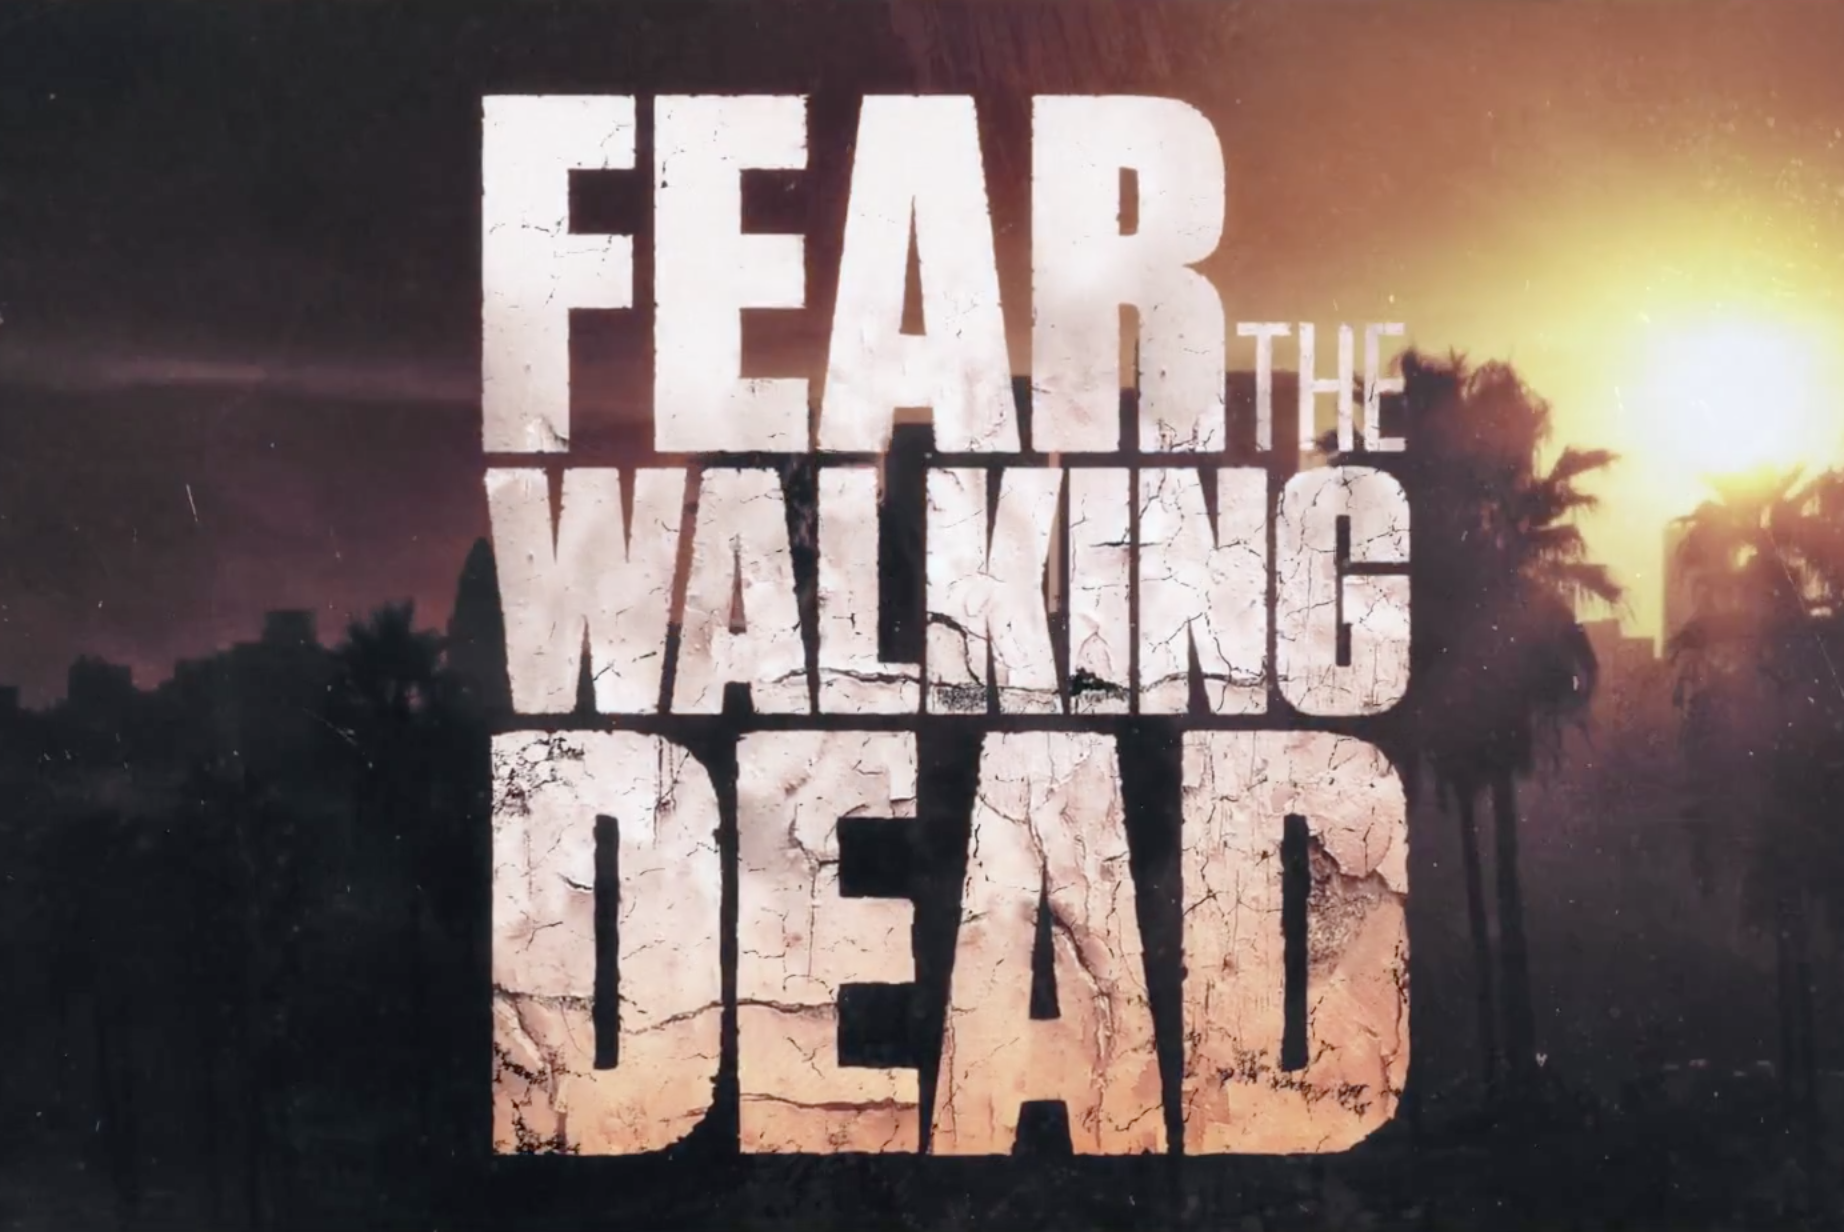 FTWD S4:Ep1 – ‘What’s you story?’